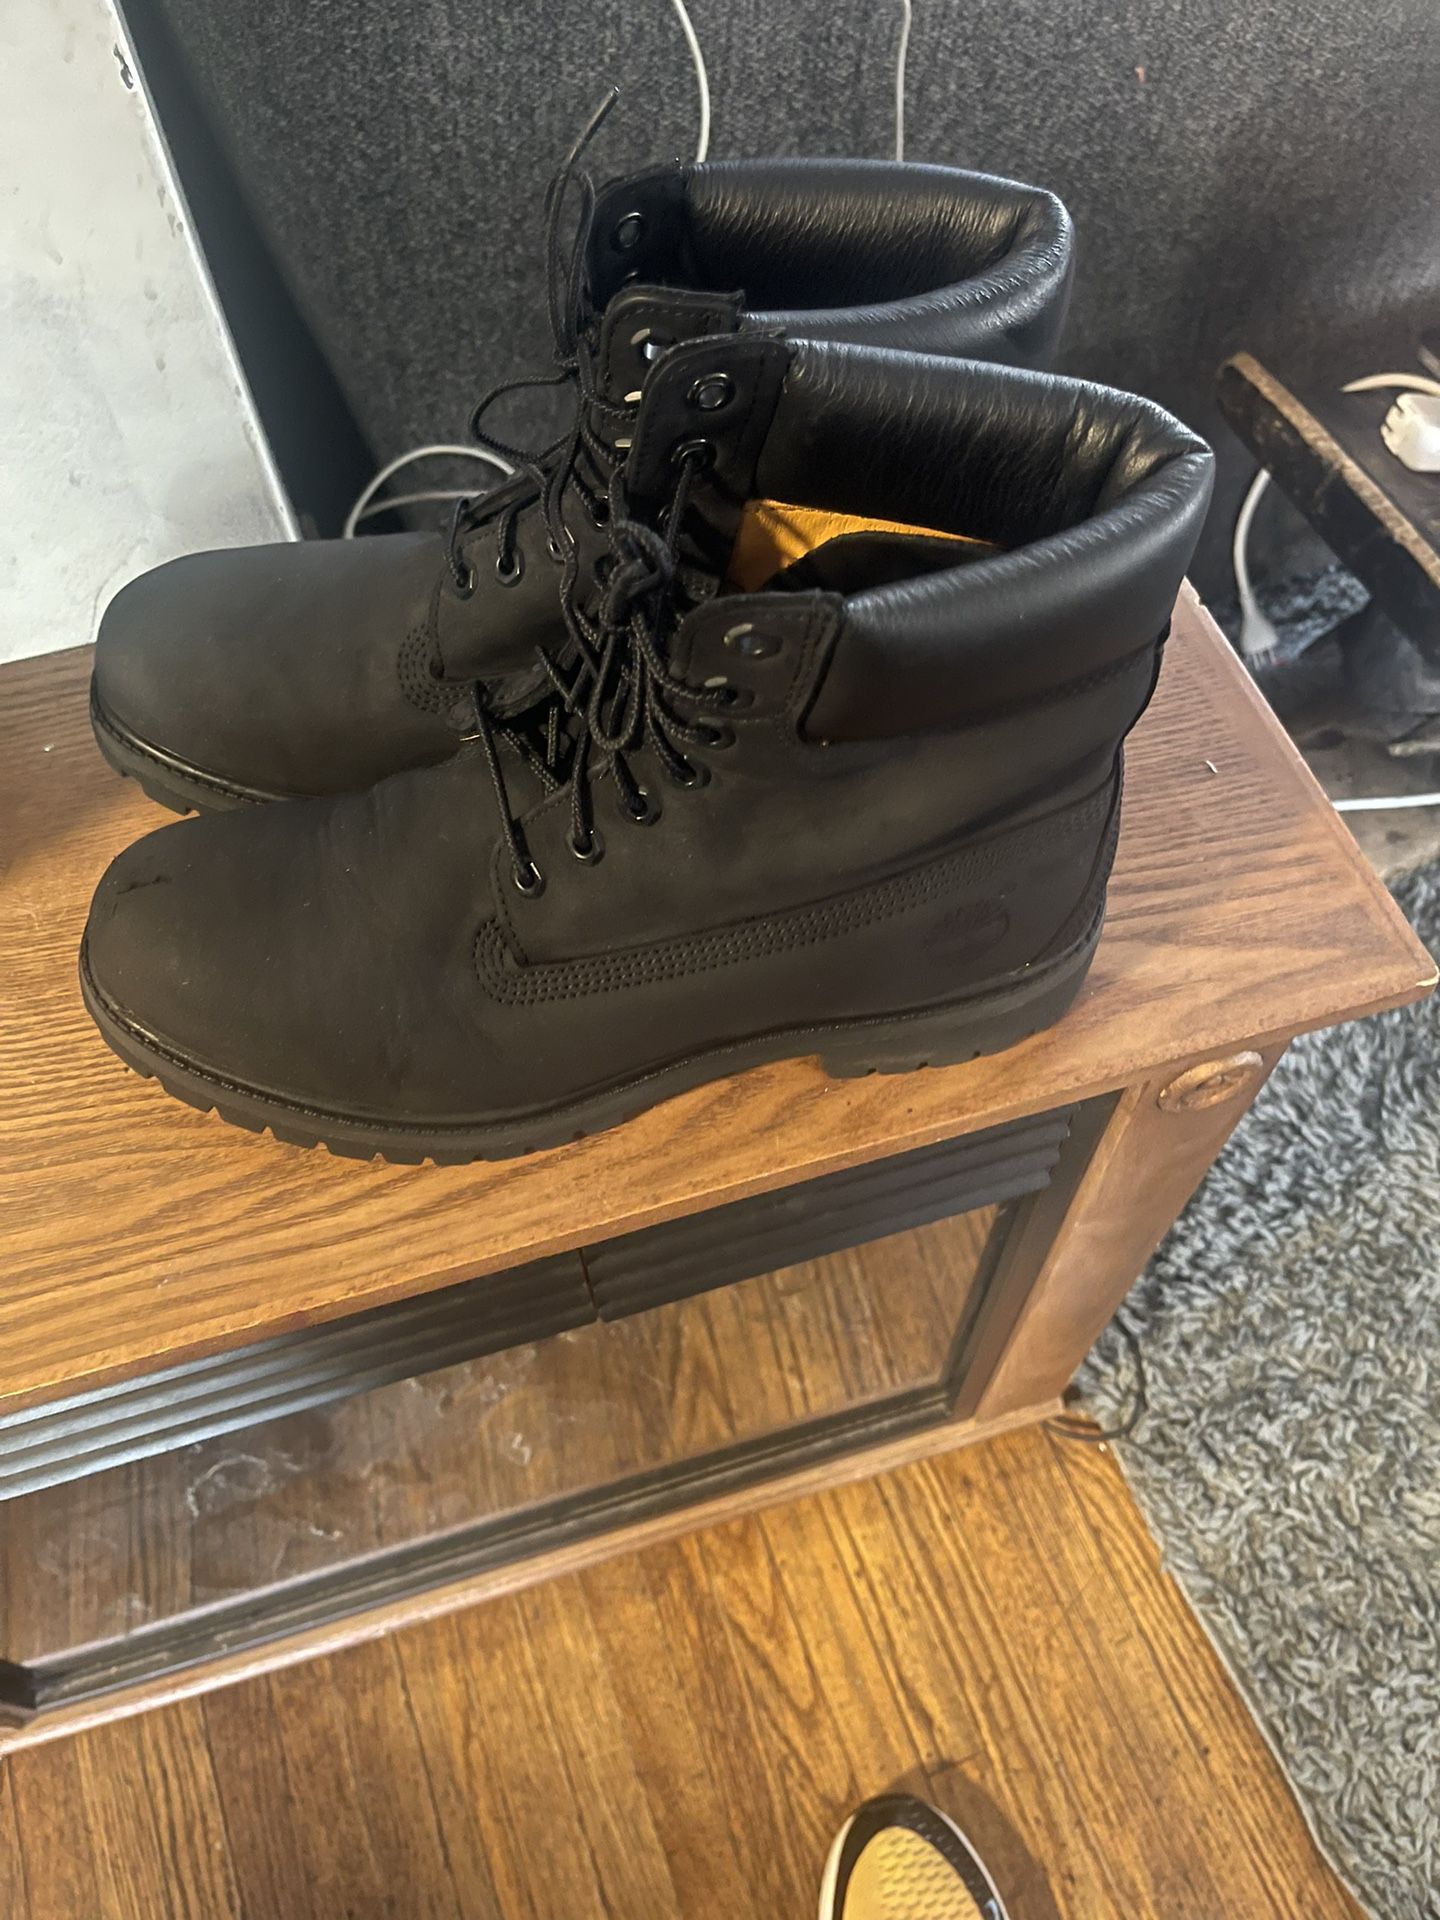 All Black Men’s Timberland Boot Size 9 M